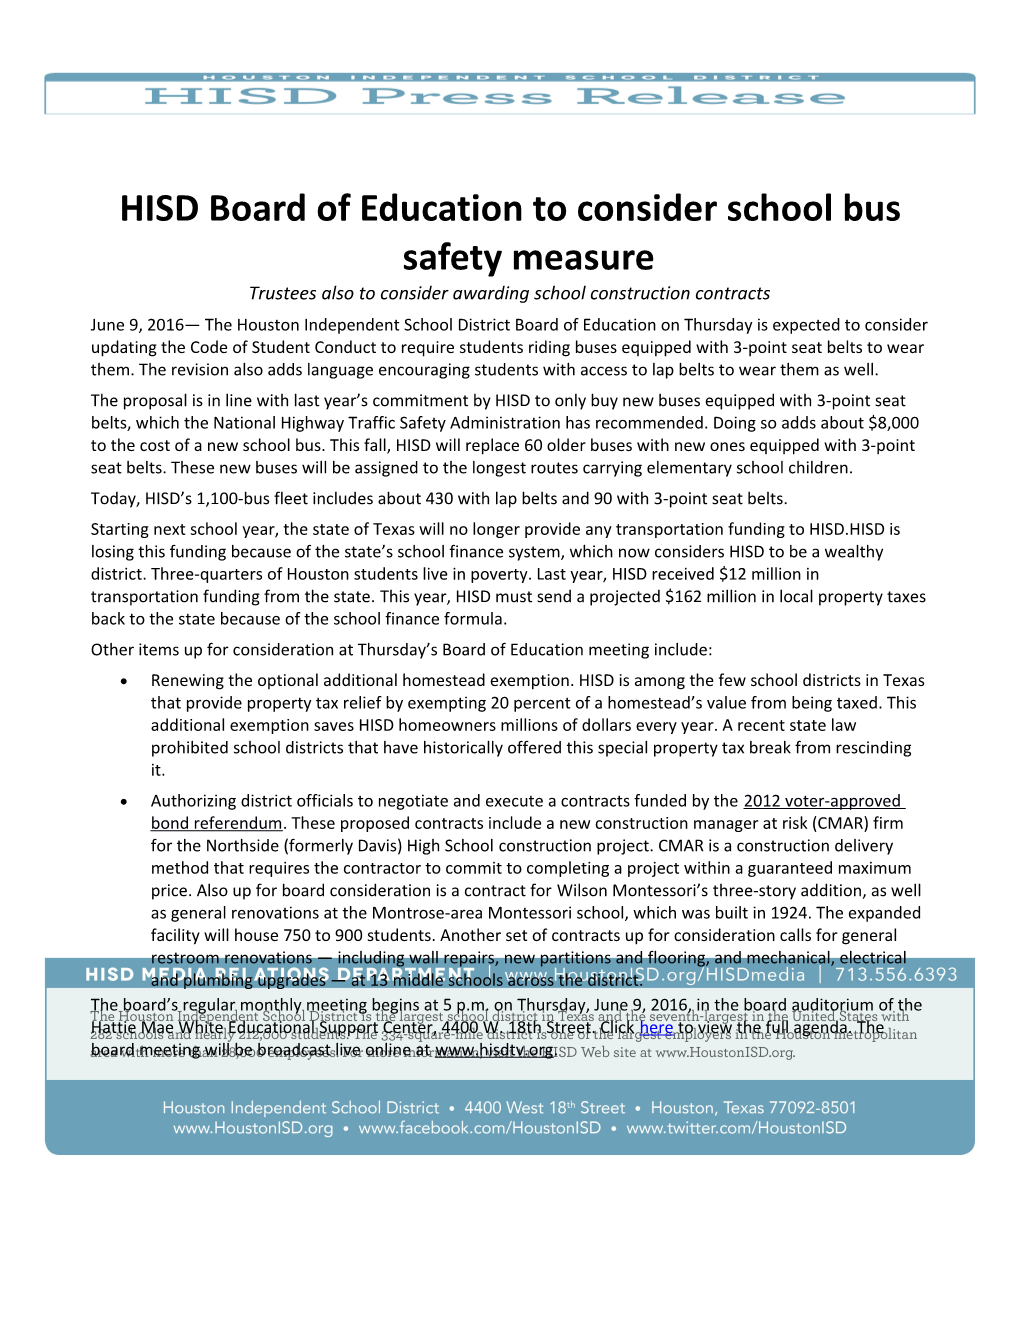 HISD Board of Education to Consider School Bus Safety Measure